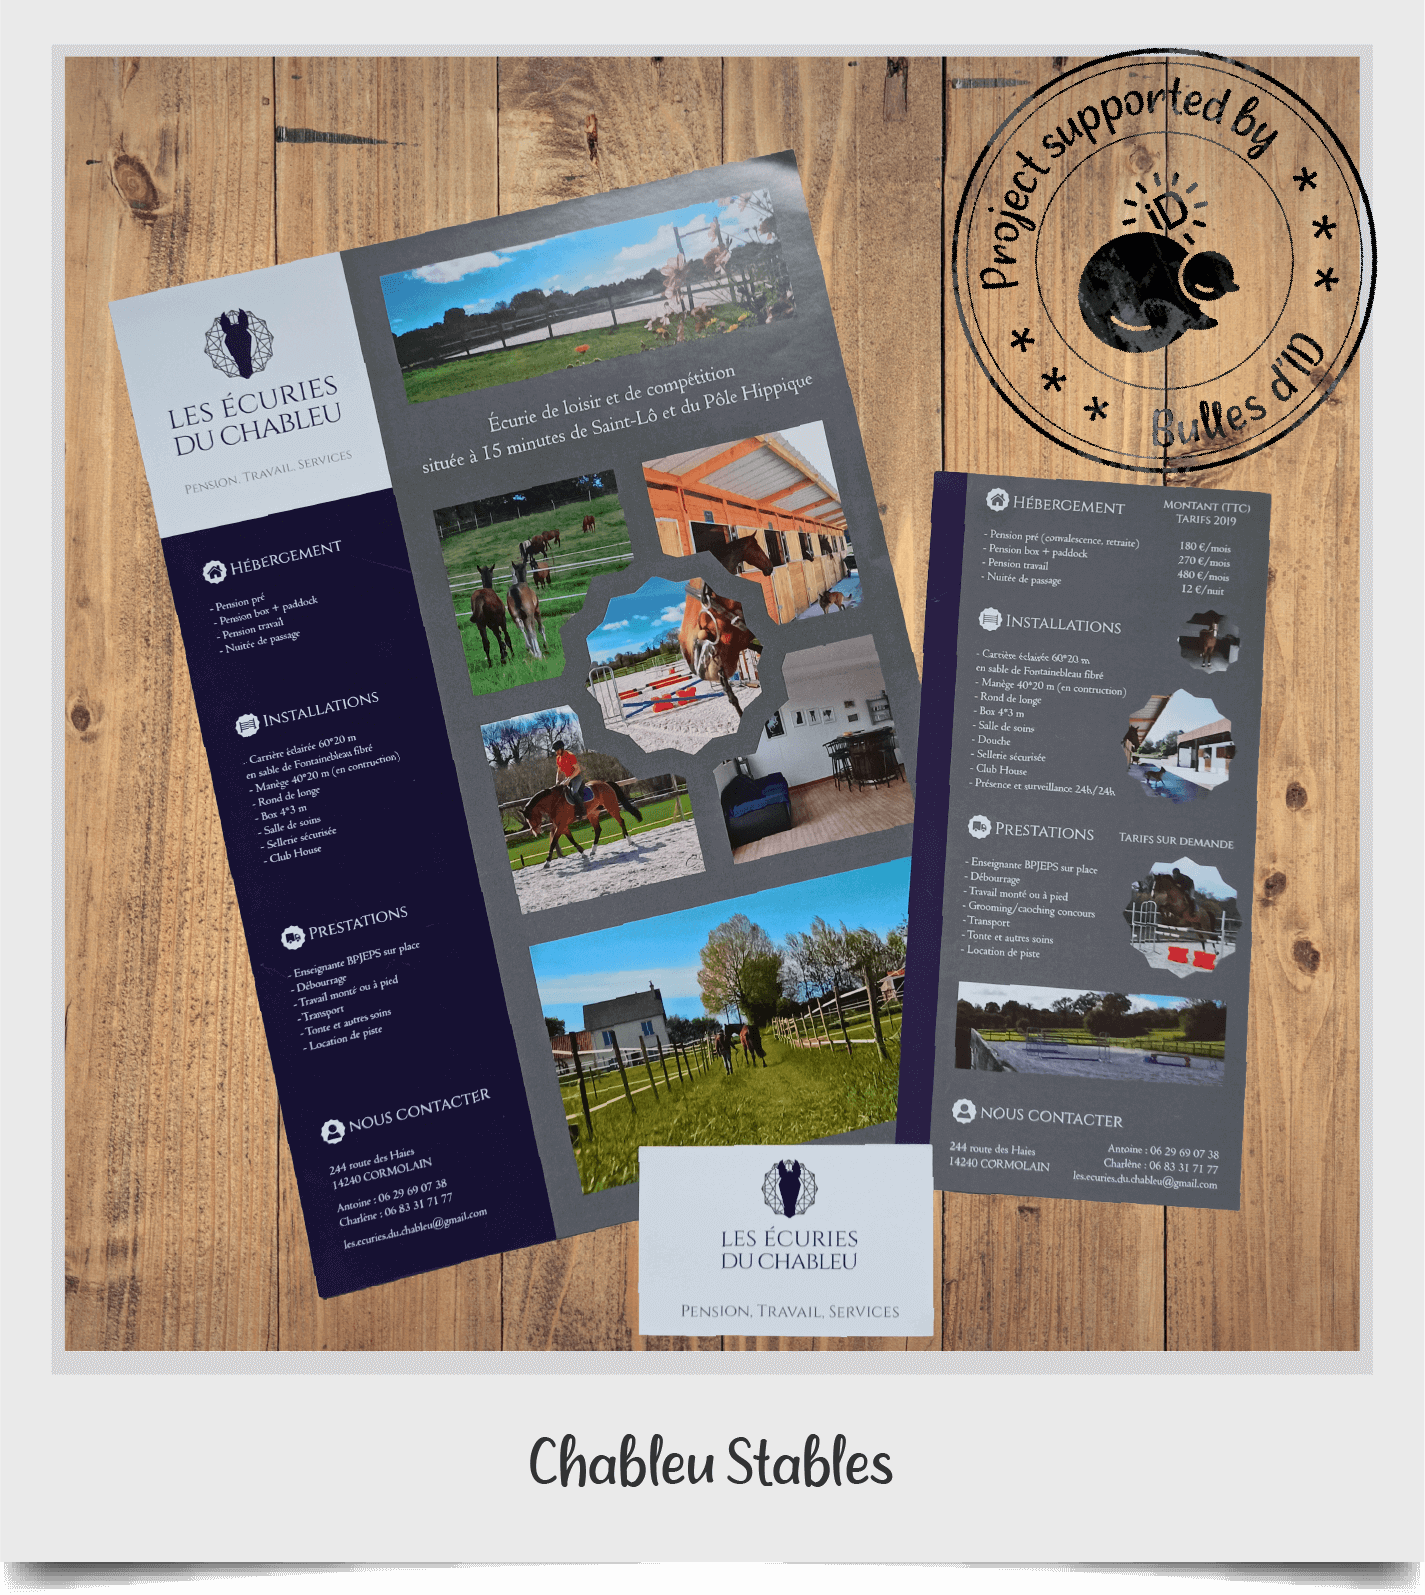 Polaroid showing our work for Chableu Stables